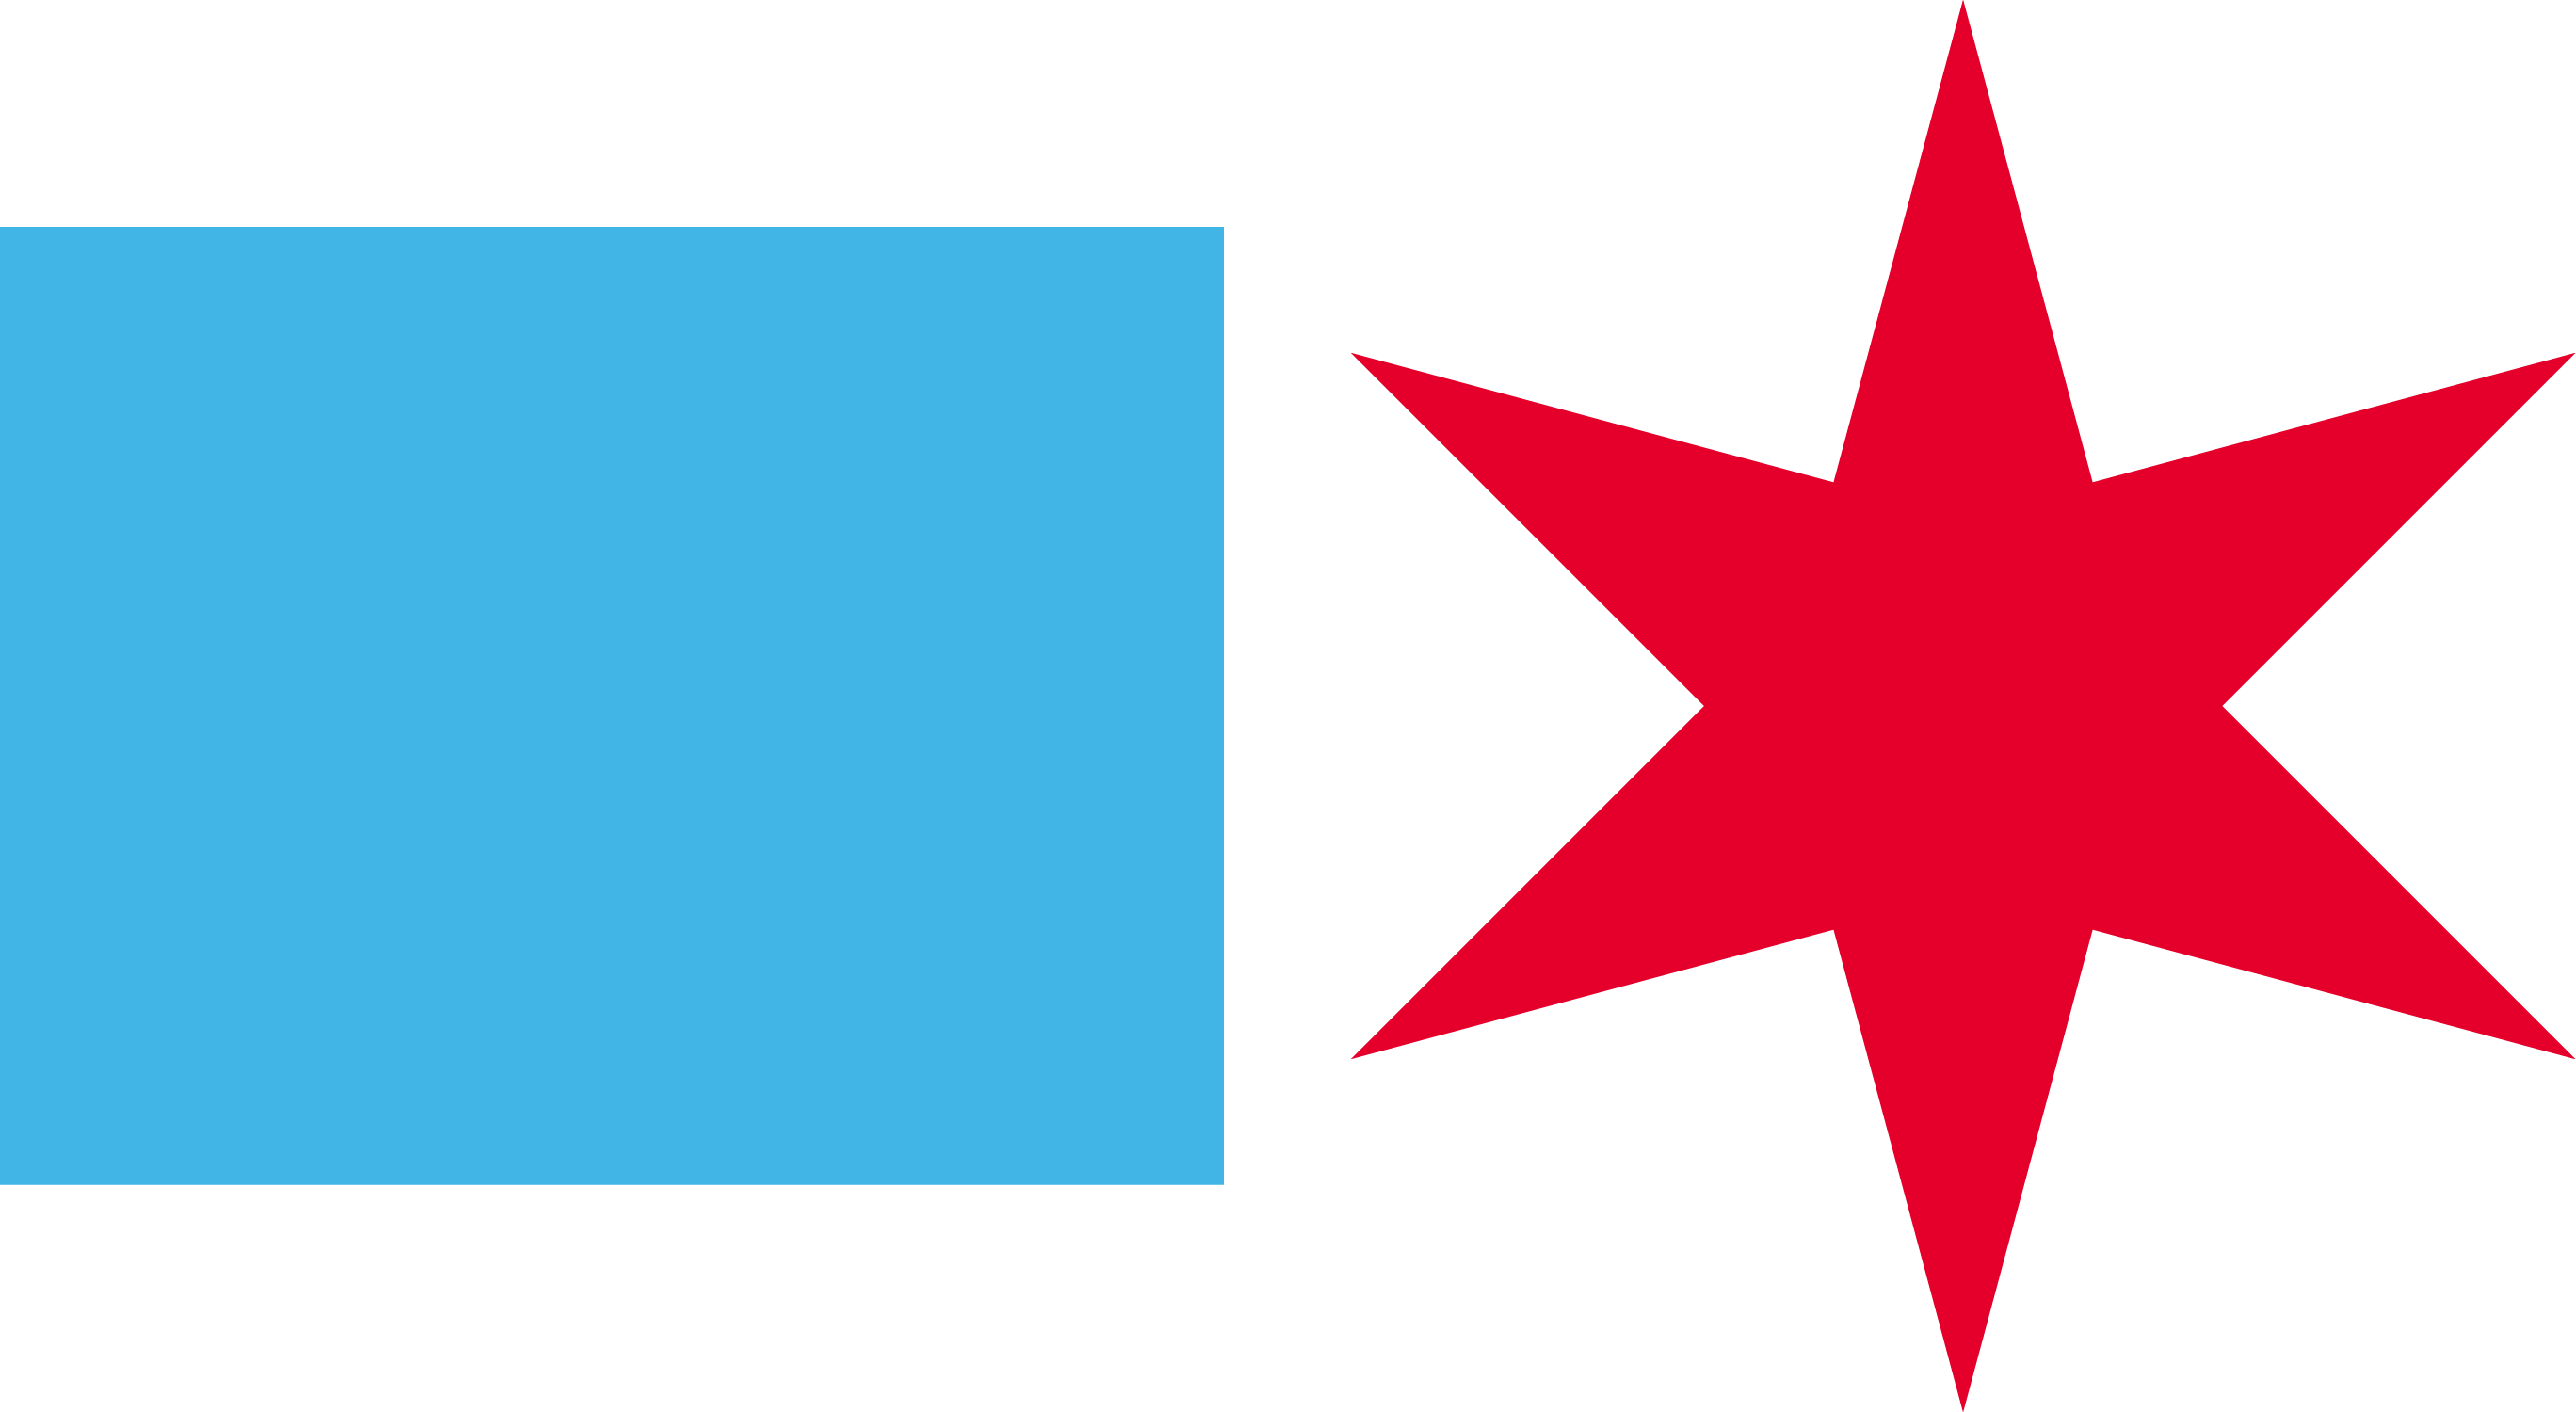 Logo of the City of Chicago